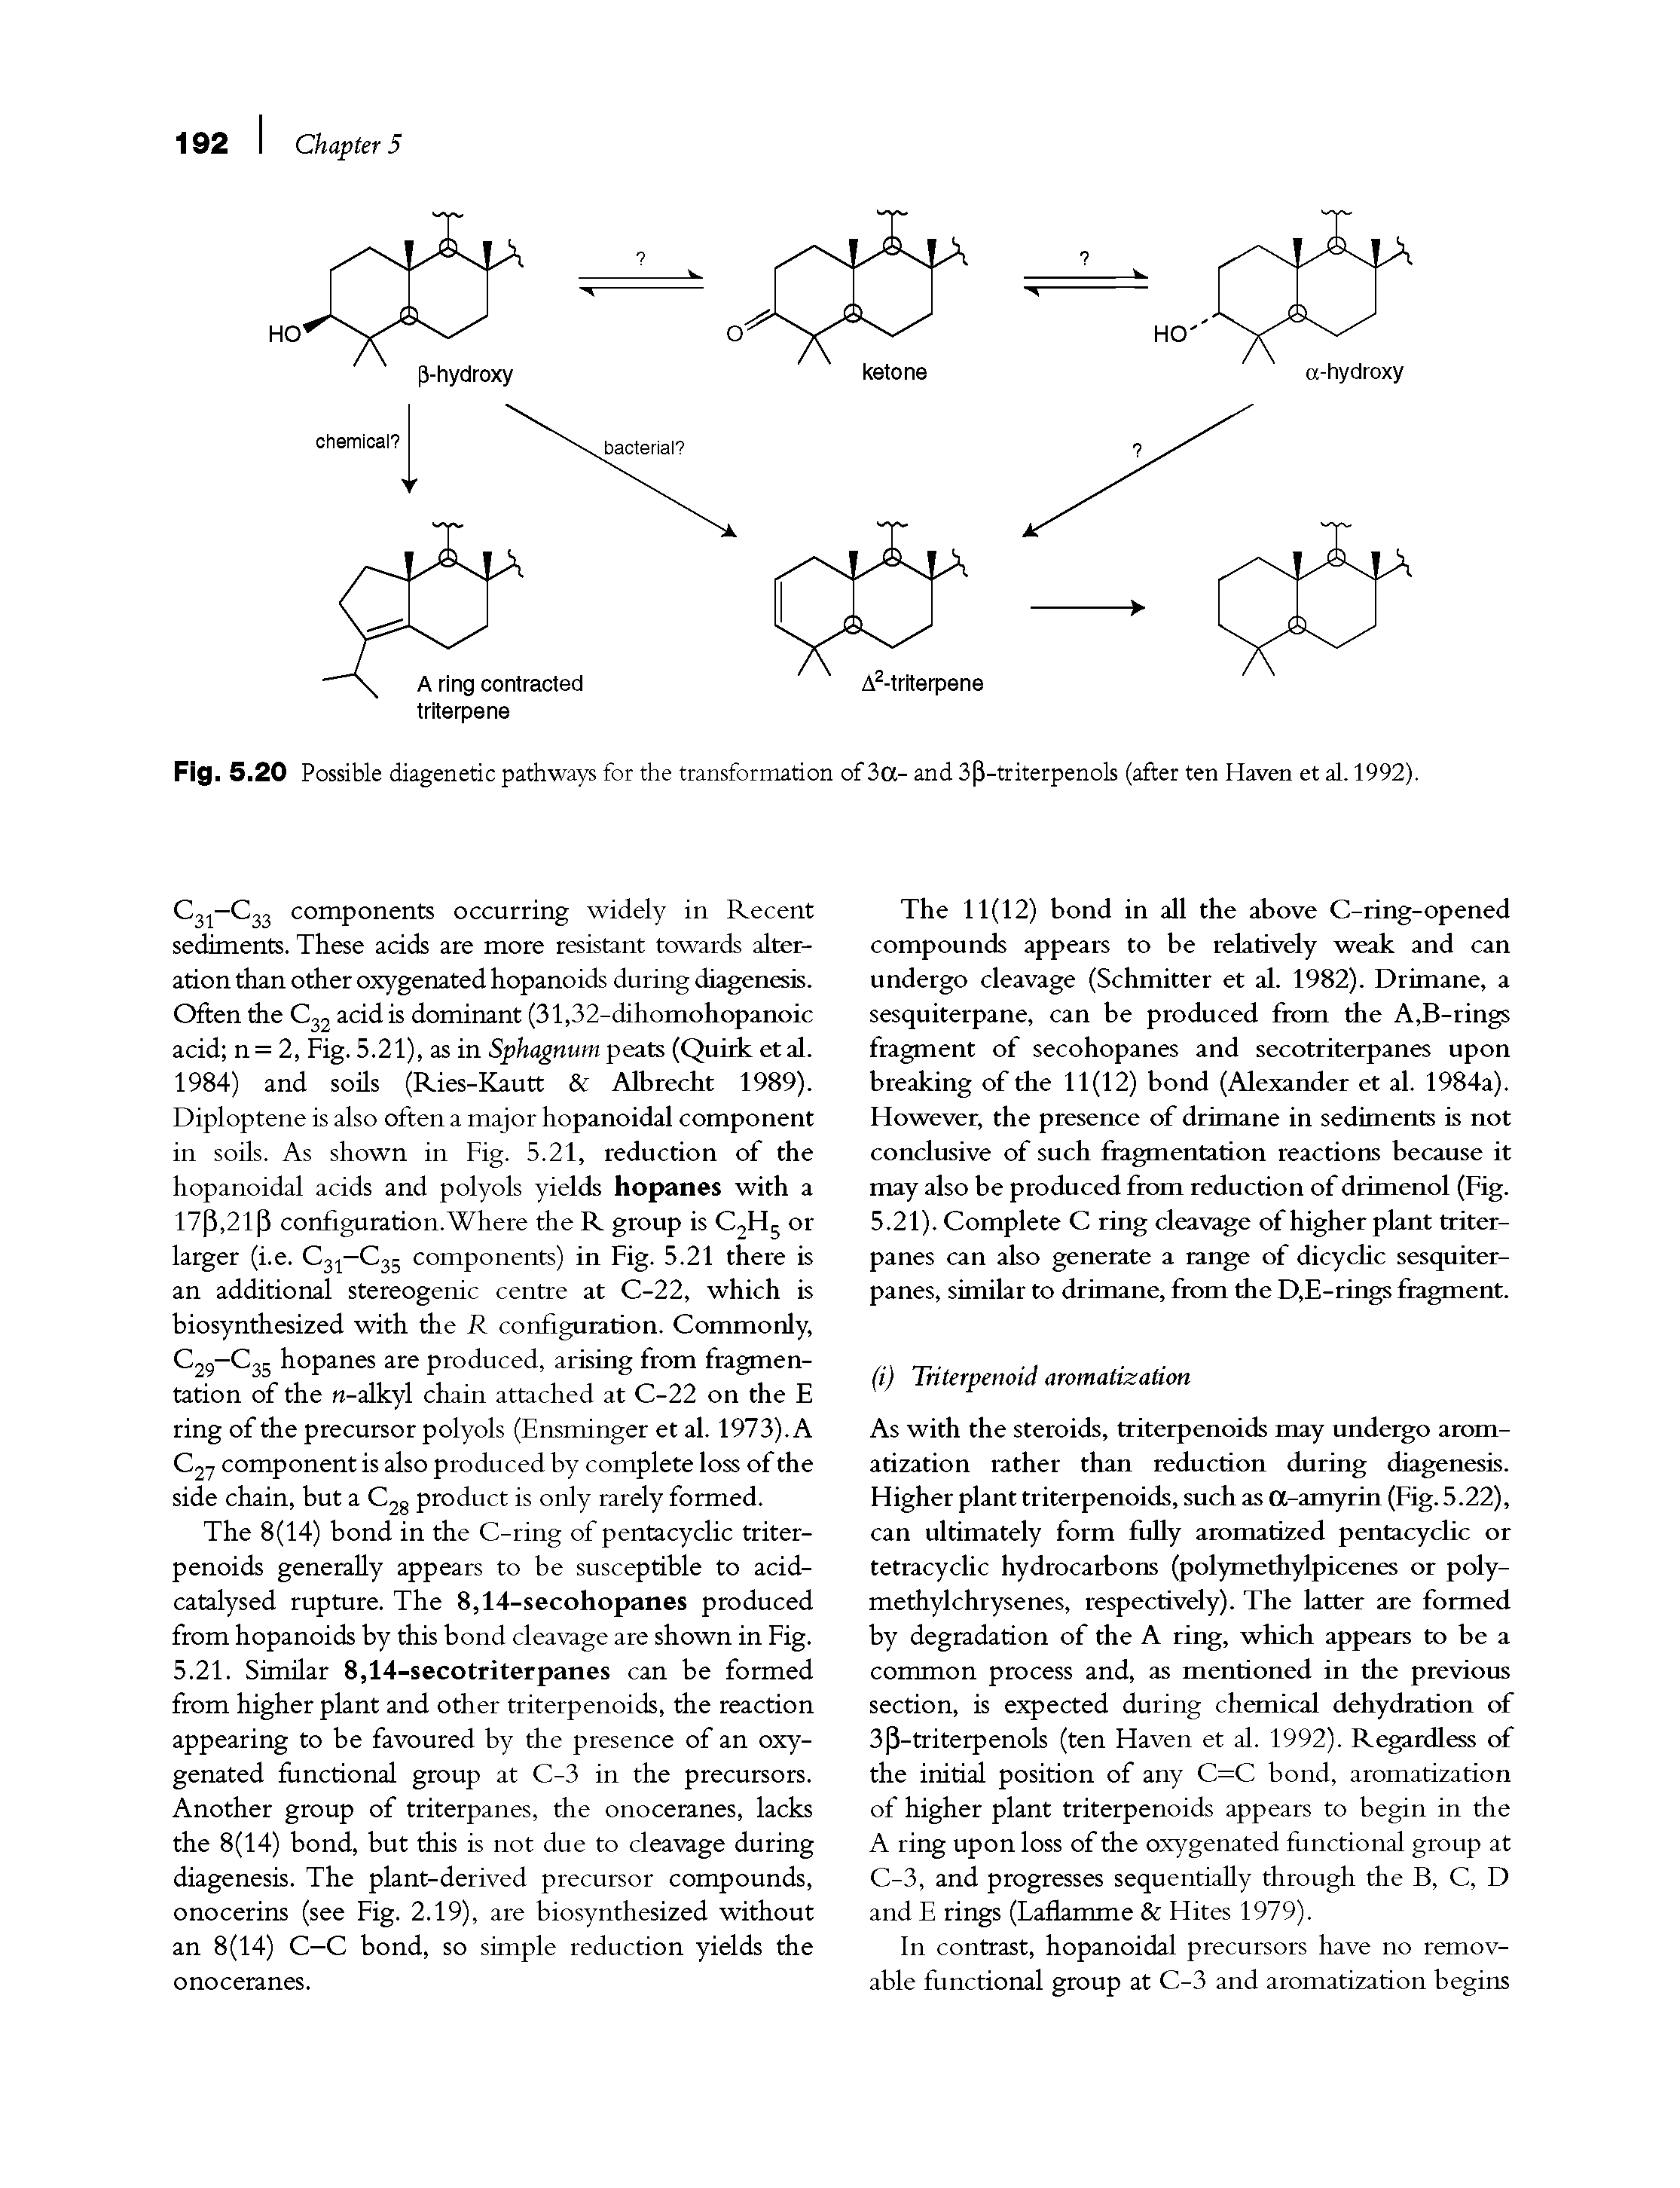 Fig. 5.20 Possible diagenetic pathways for the transformation of 3a- and 3 3-triterpenols (after ten Haven et al. 1992).